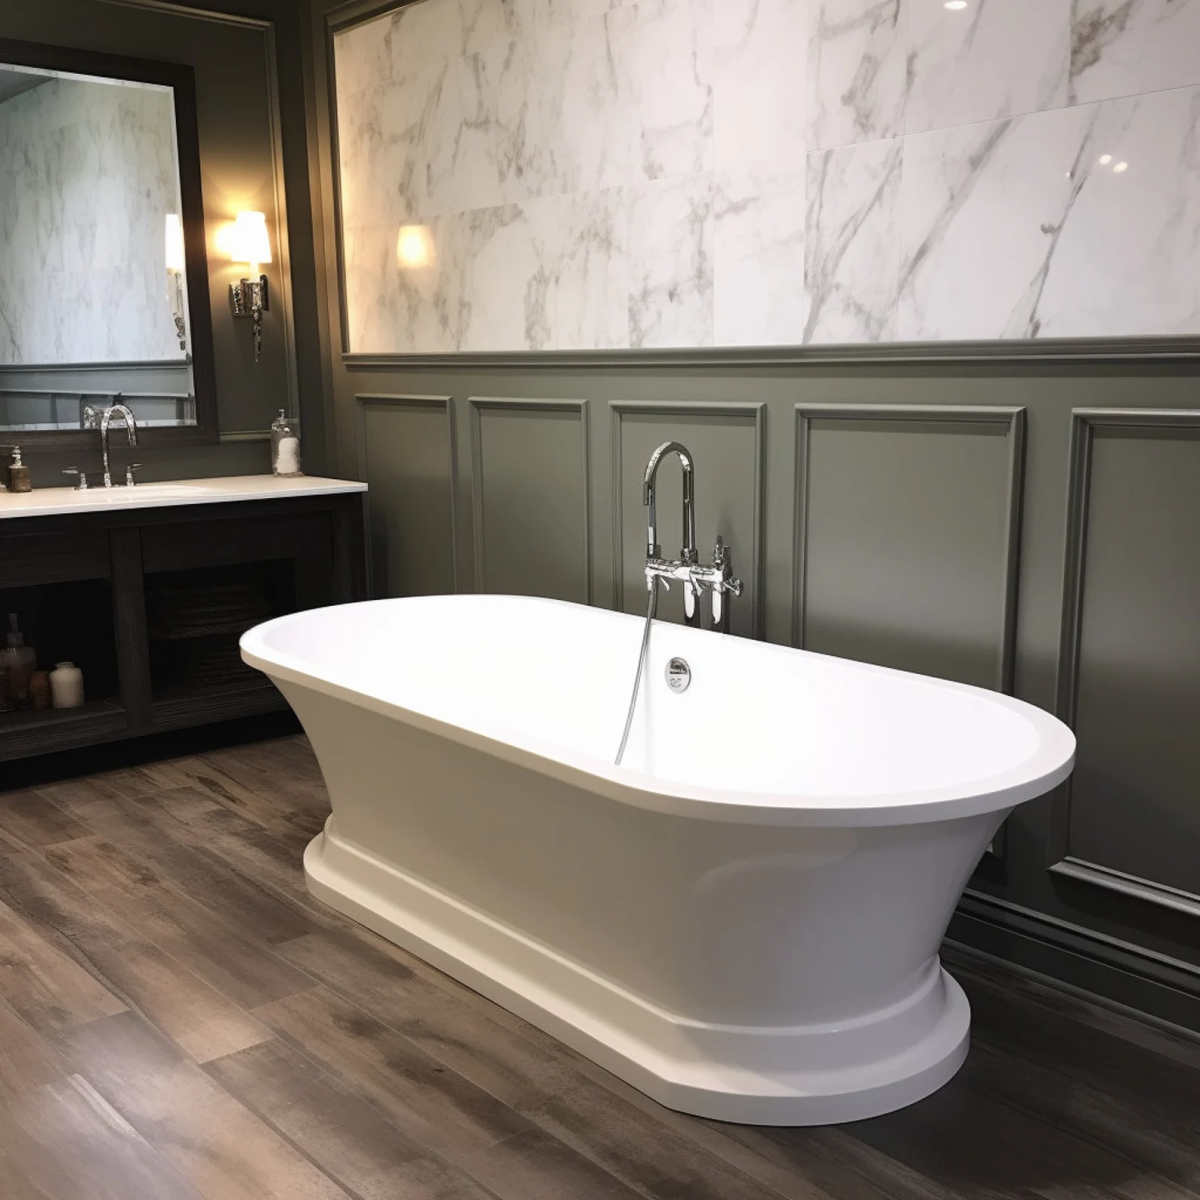 A white bathtub sits next to a wall with marble top and wainscoting half wall.